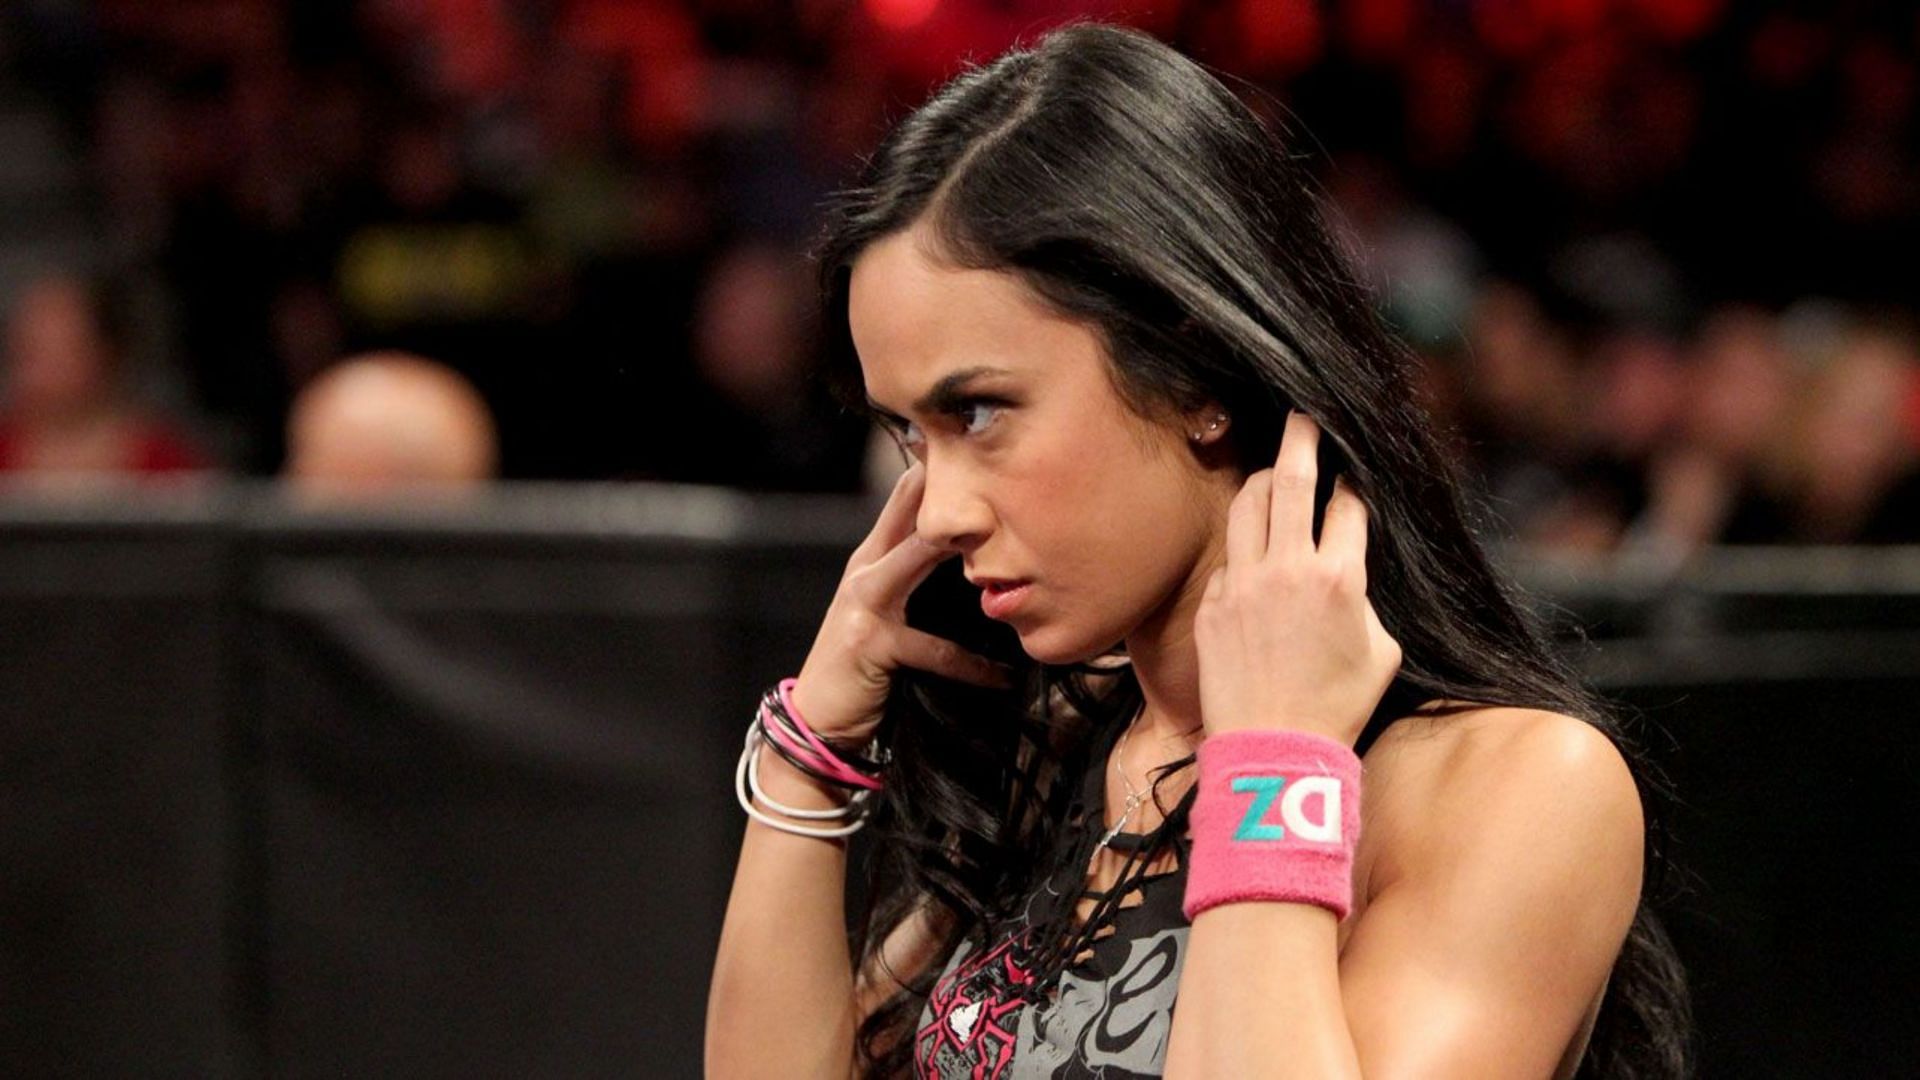 An ex-boyfriend cheated on AJ Lee with one of her best friends